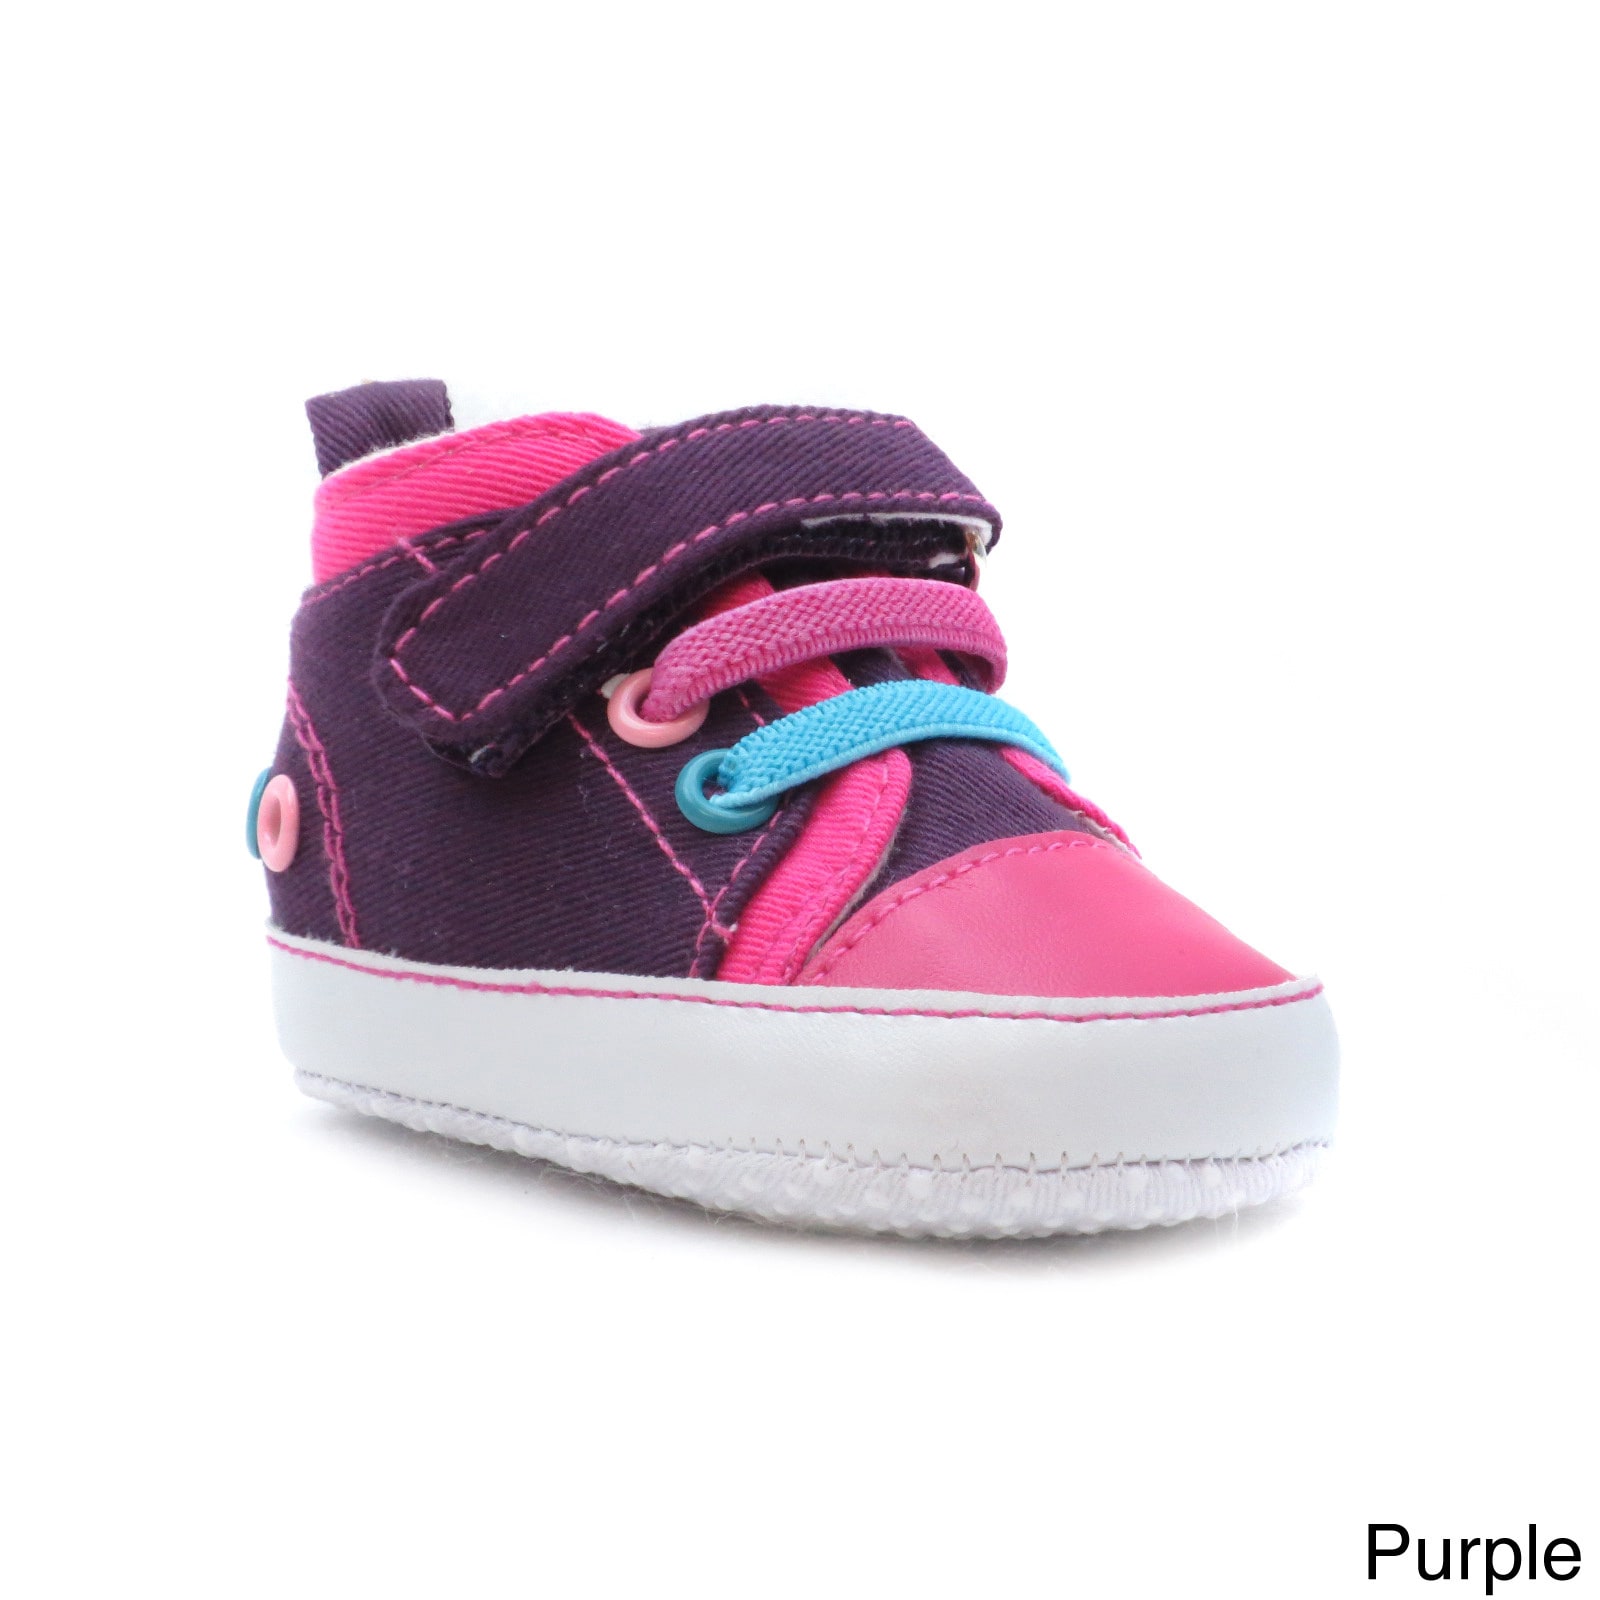 pink canvas tennis shoes